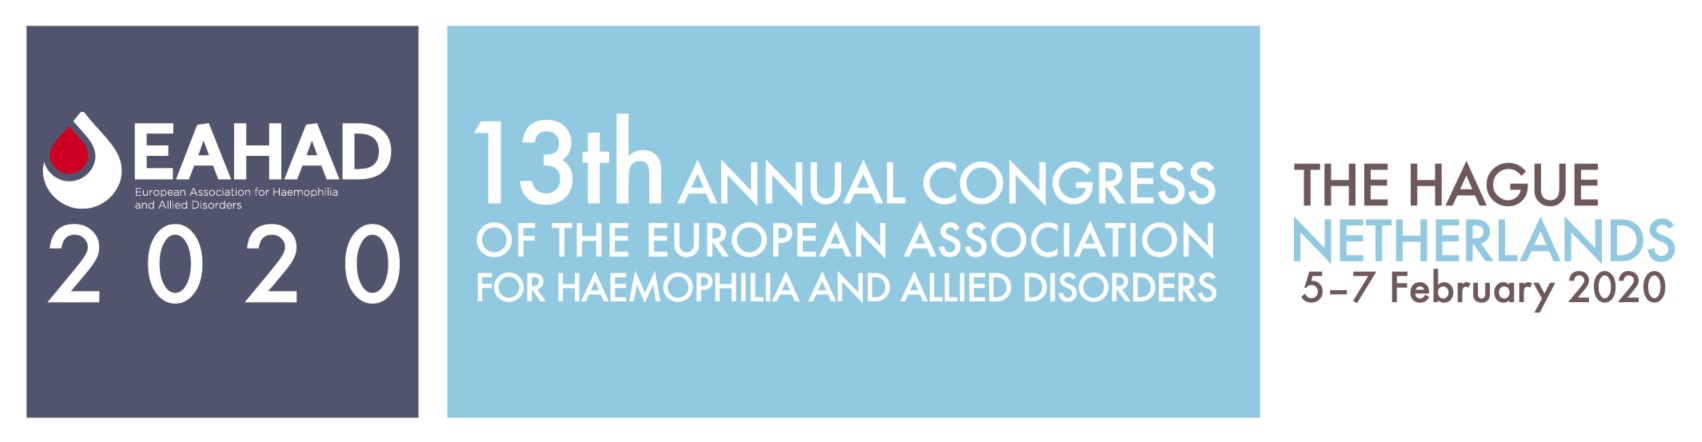 13th Annual Congress of the European Association for Haemophilia and Allied Disorders - EAHAD 2020